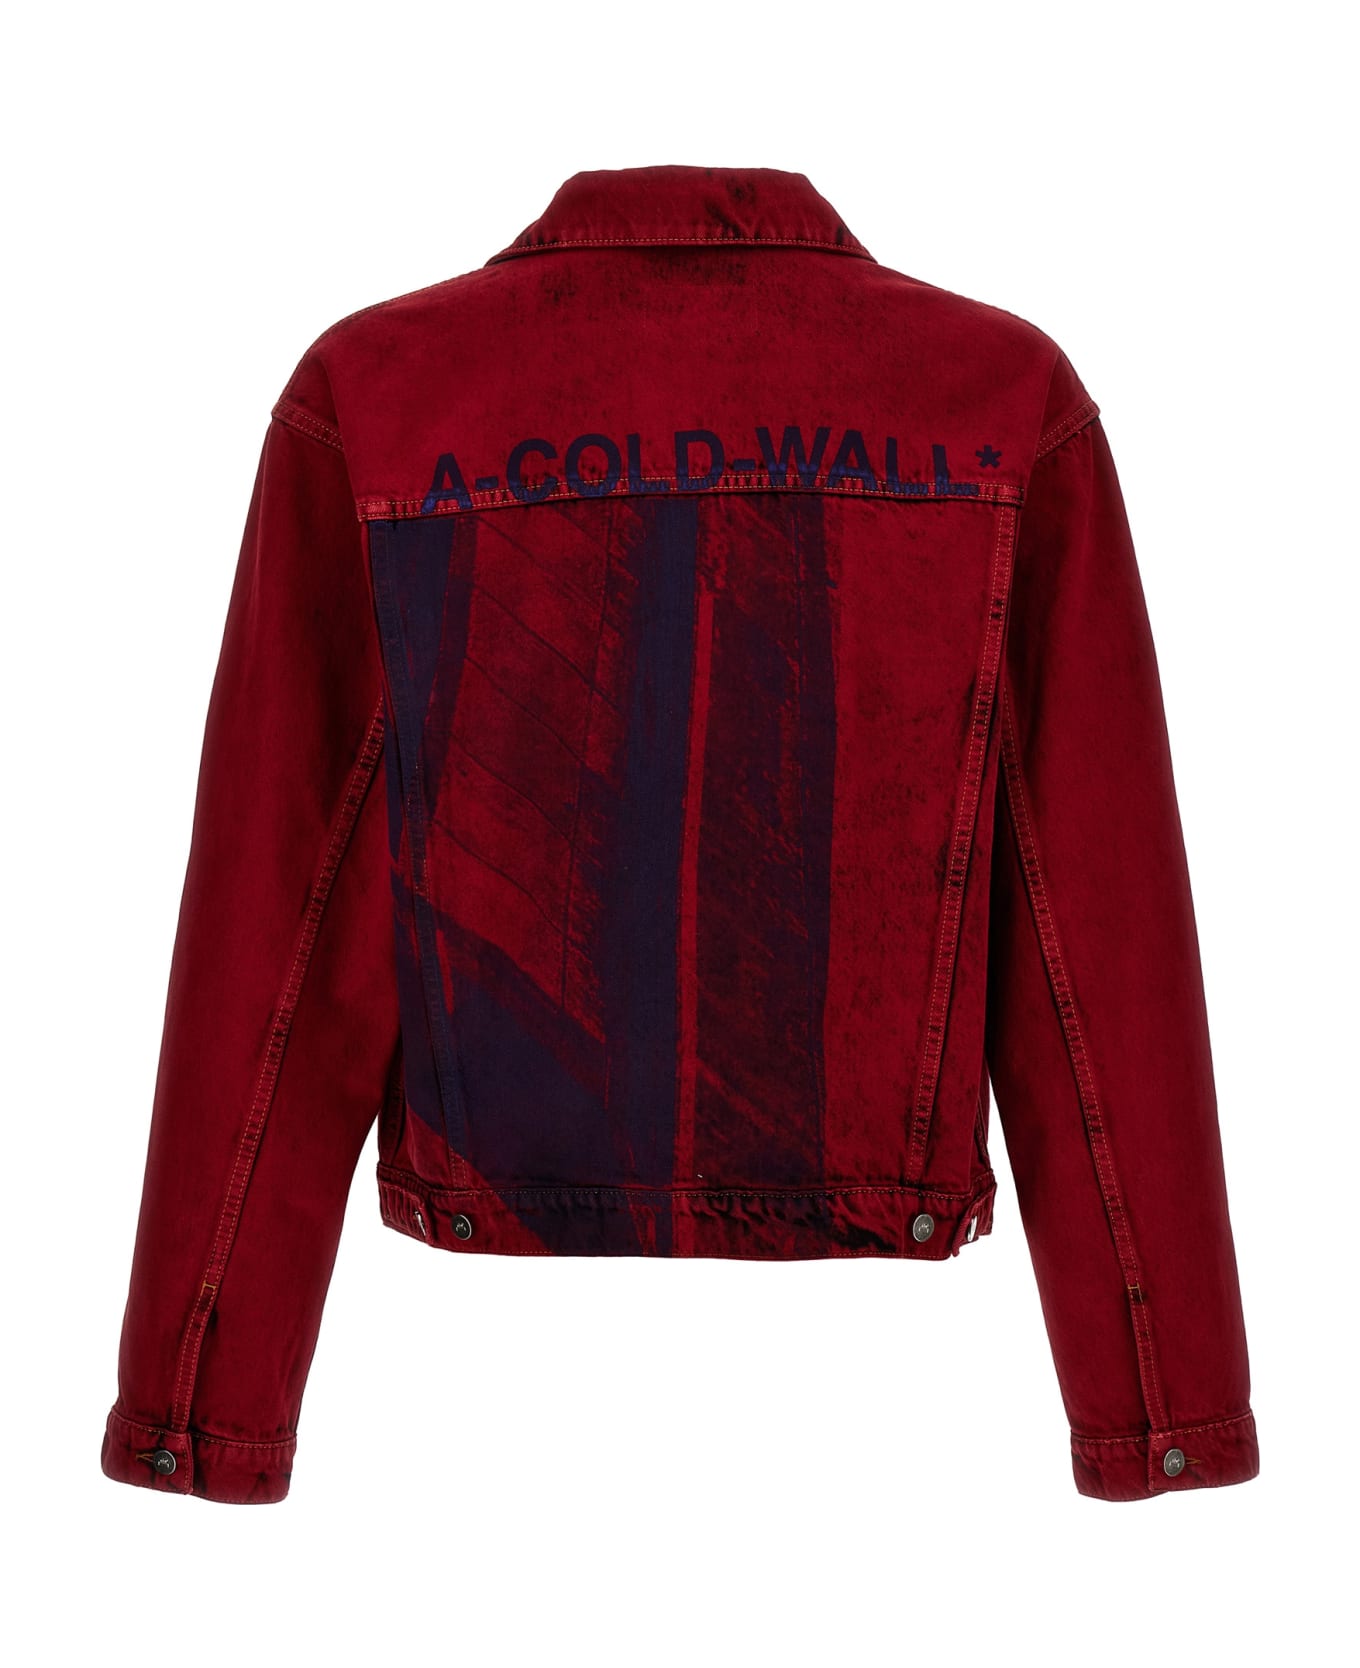 A-COLD-WALL 'strand Trucker' Jacket - Red ジャケット